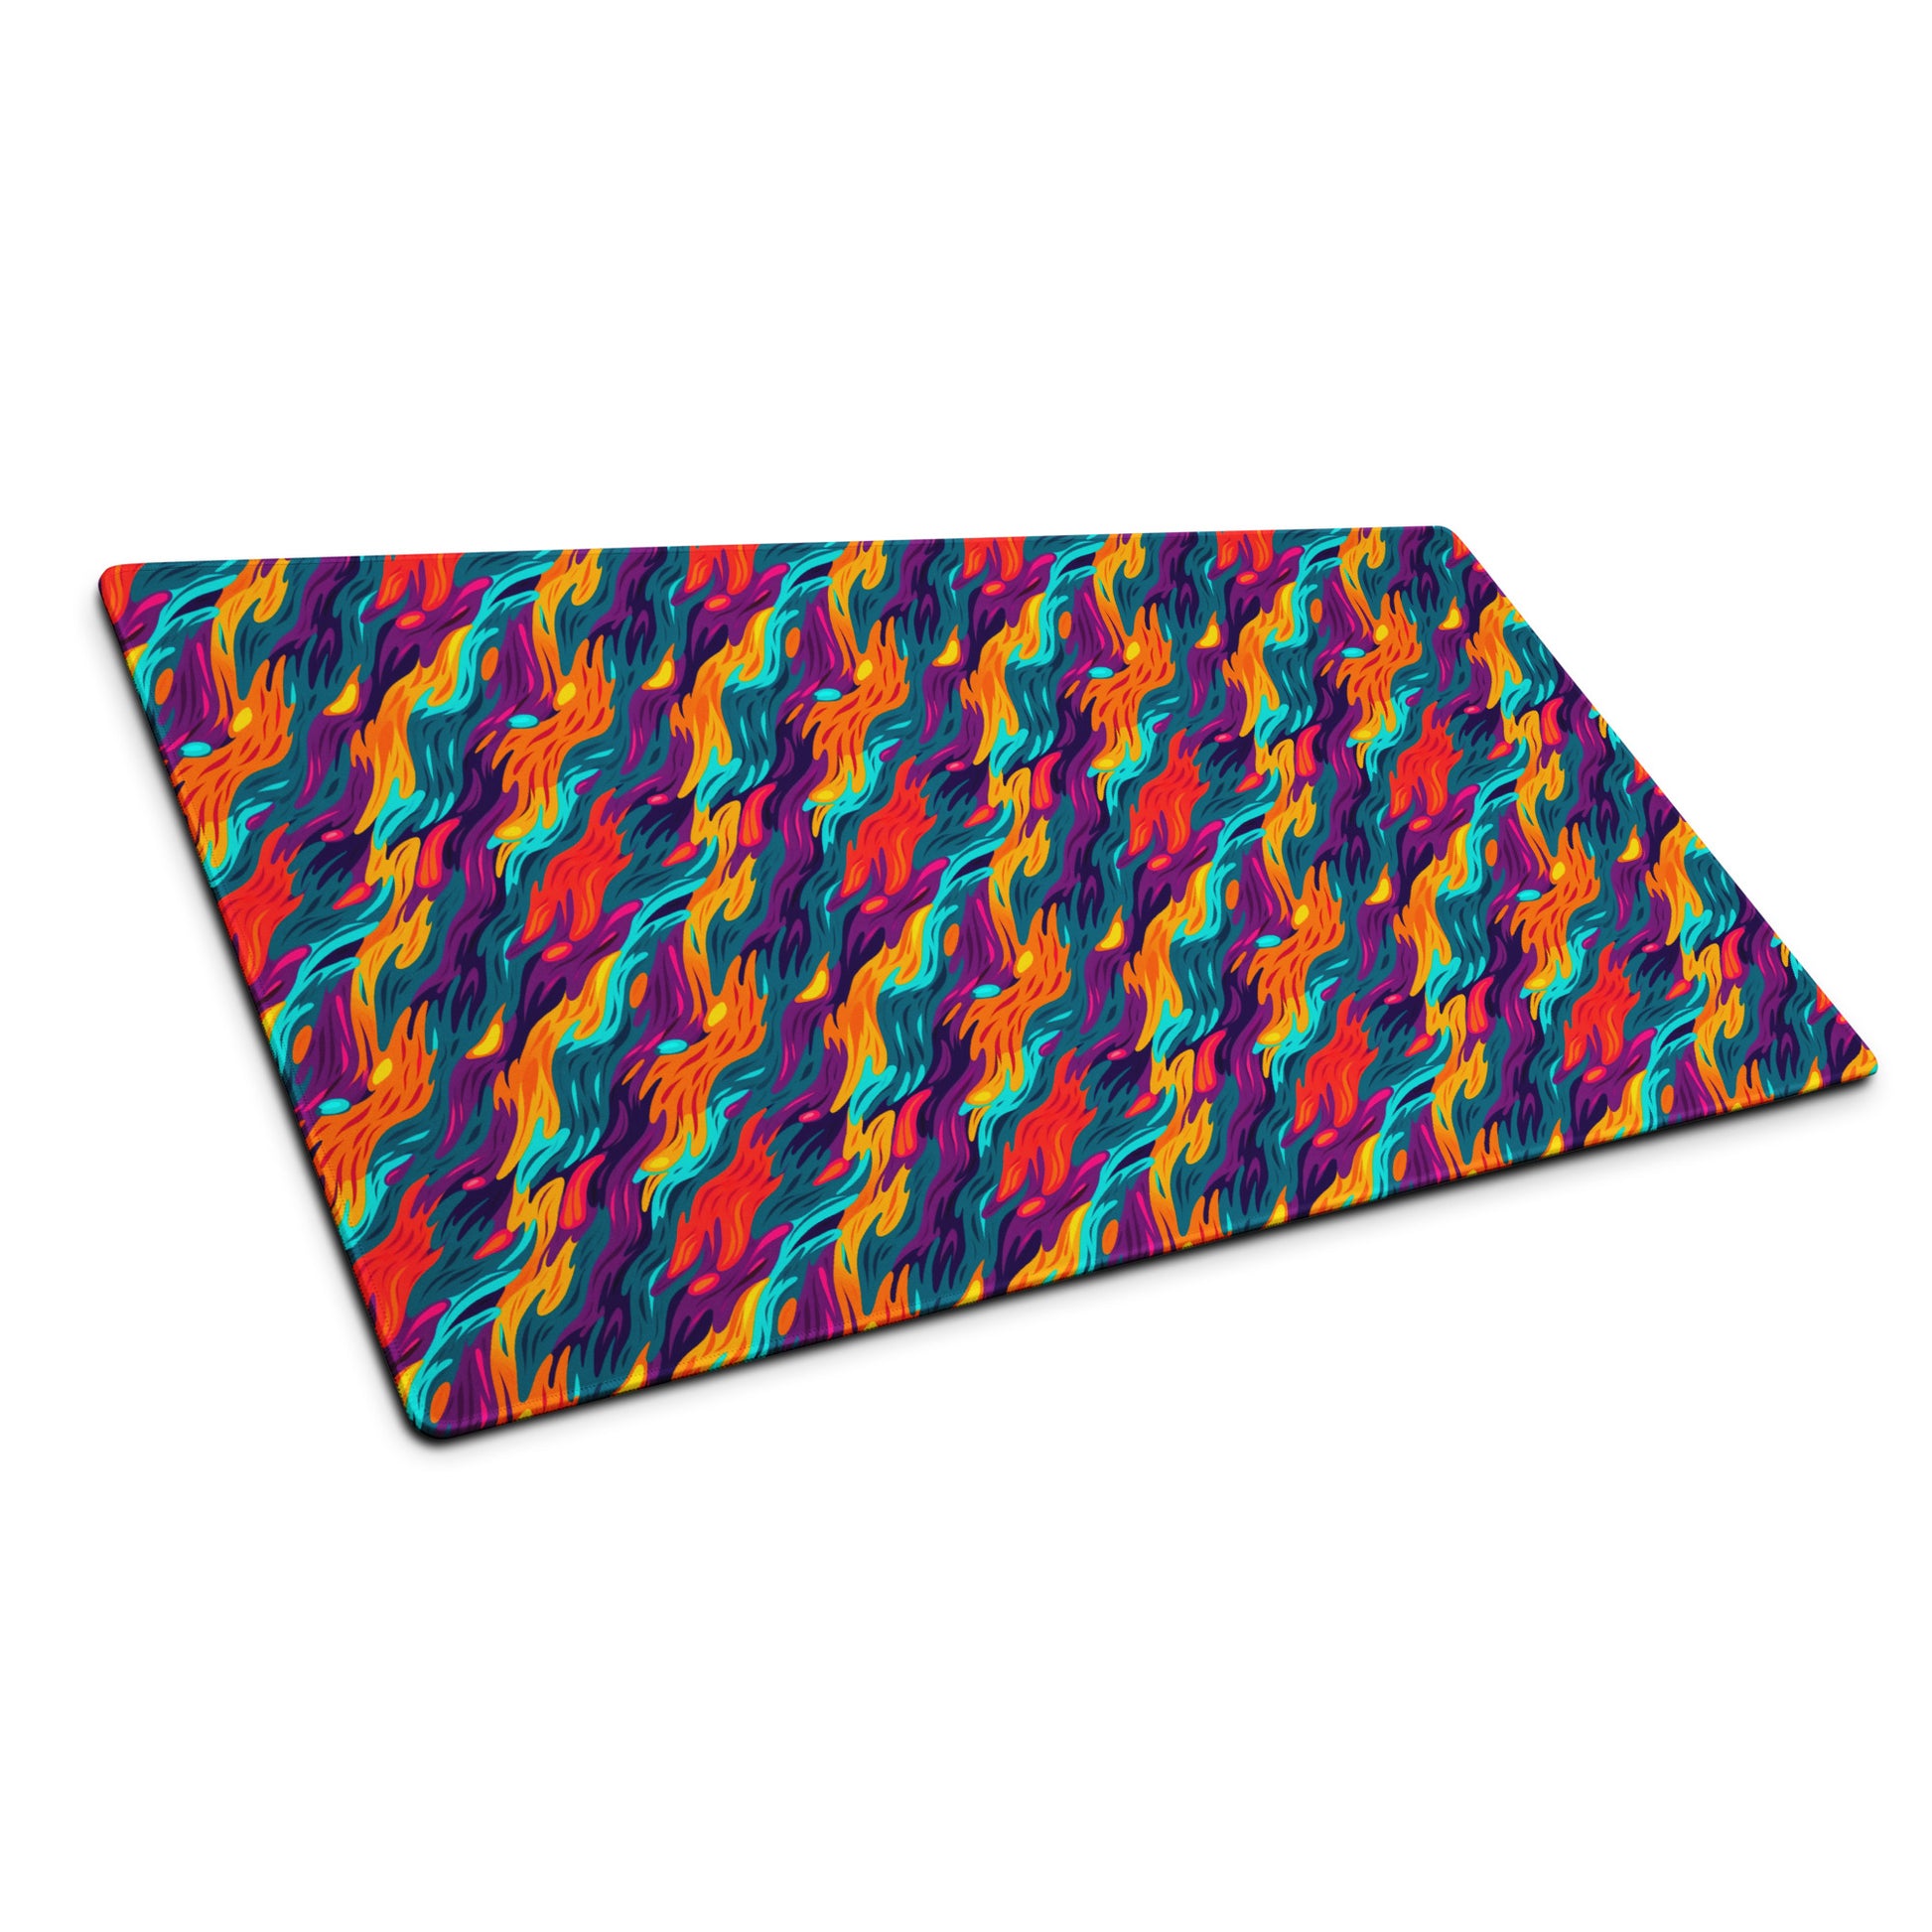 A 36" x 18" desk pad with a wavy flame pattern on it shown at an angle. Rainbow in color.